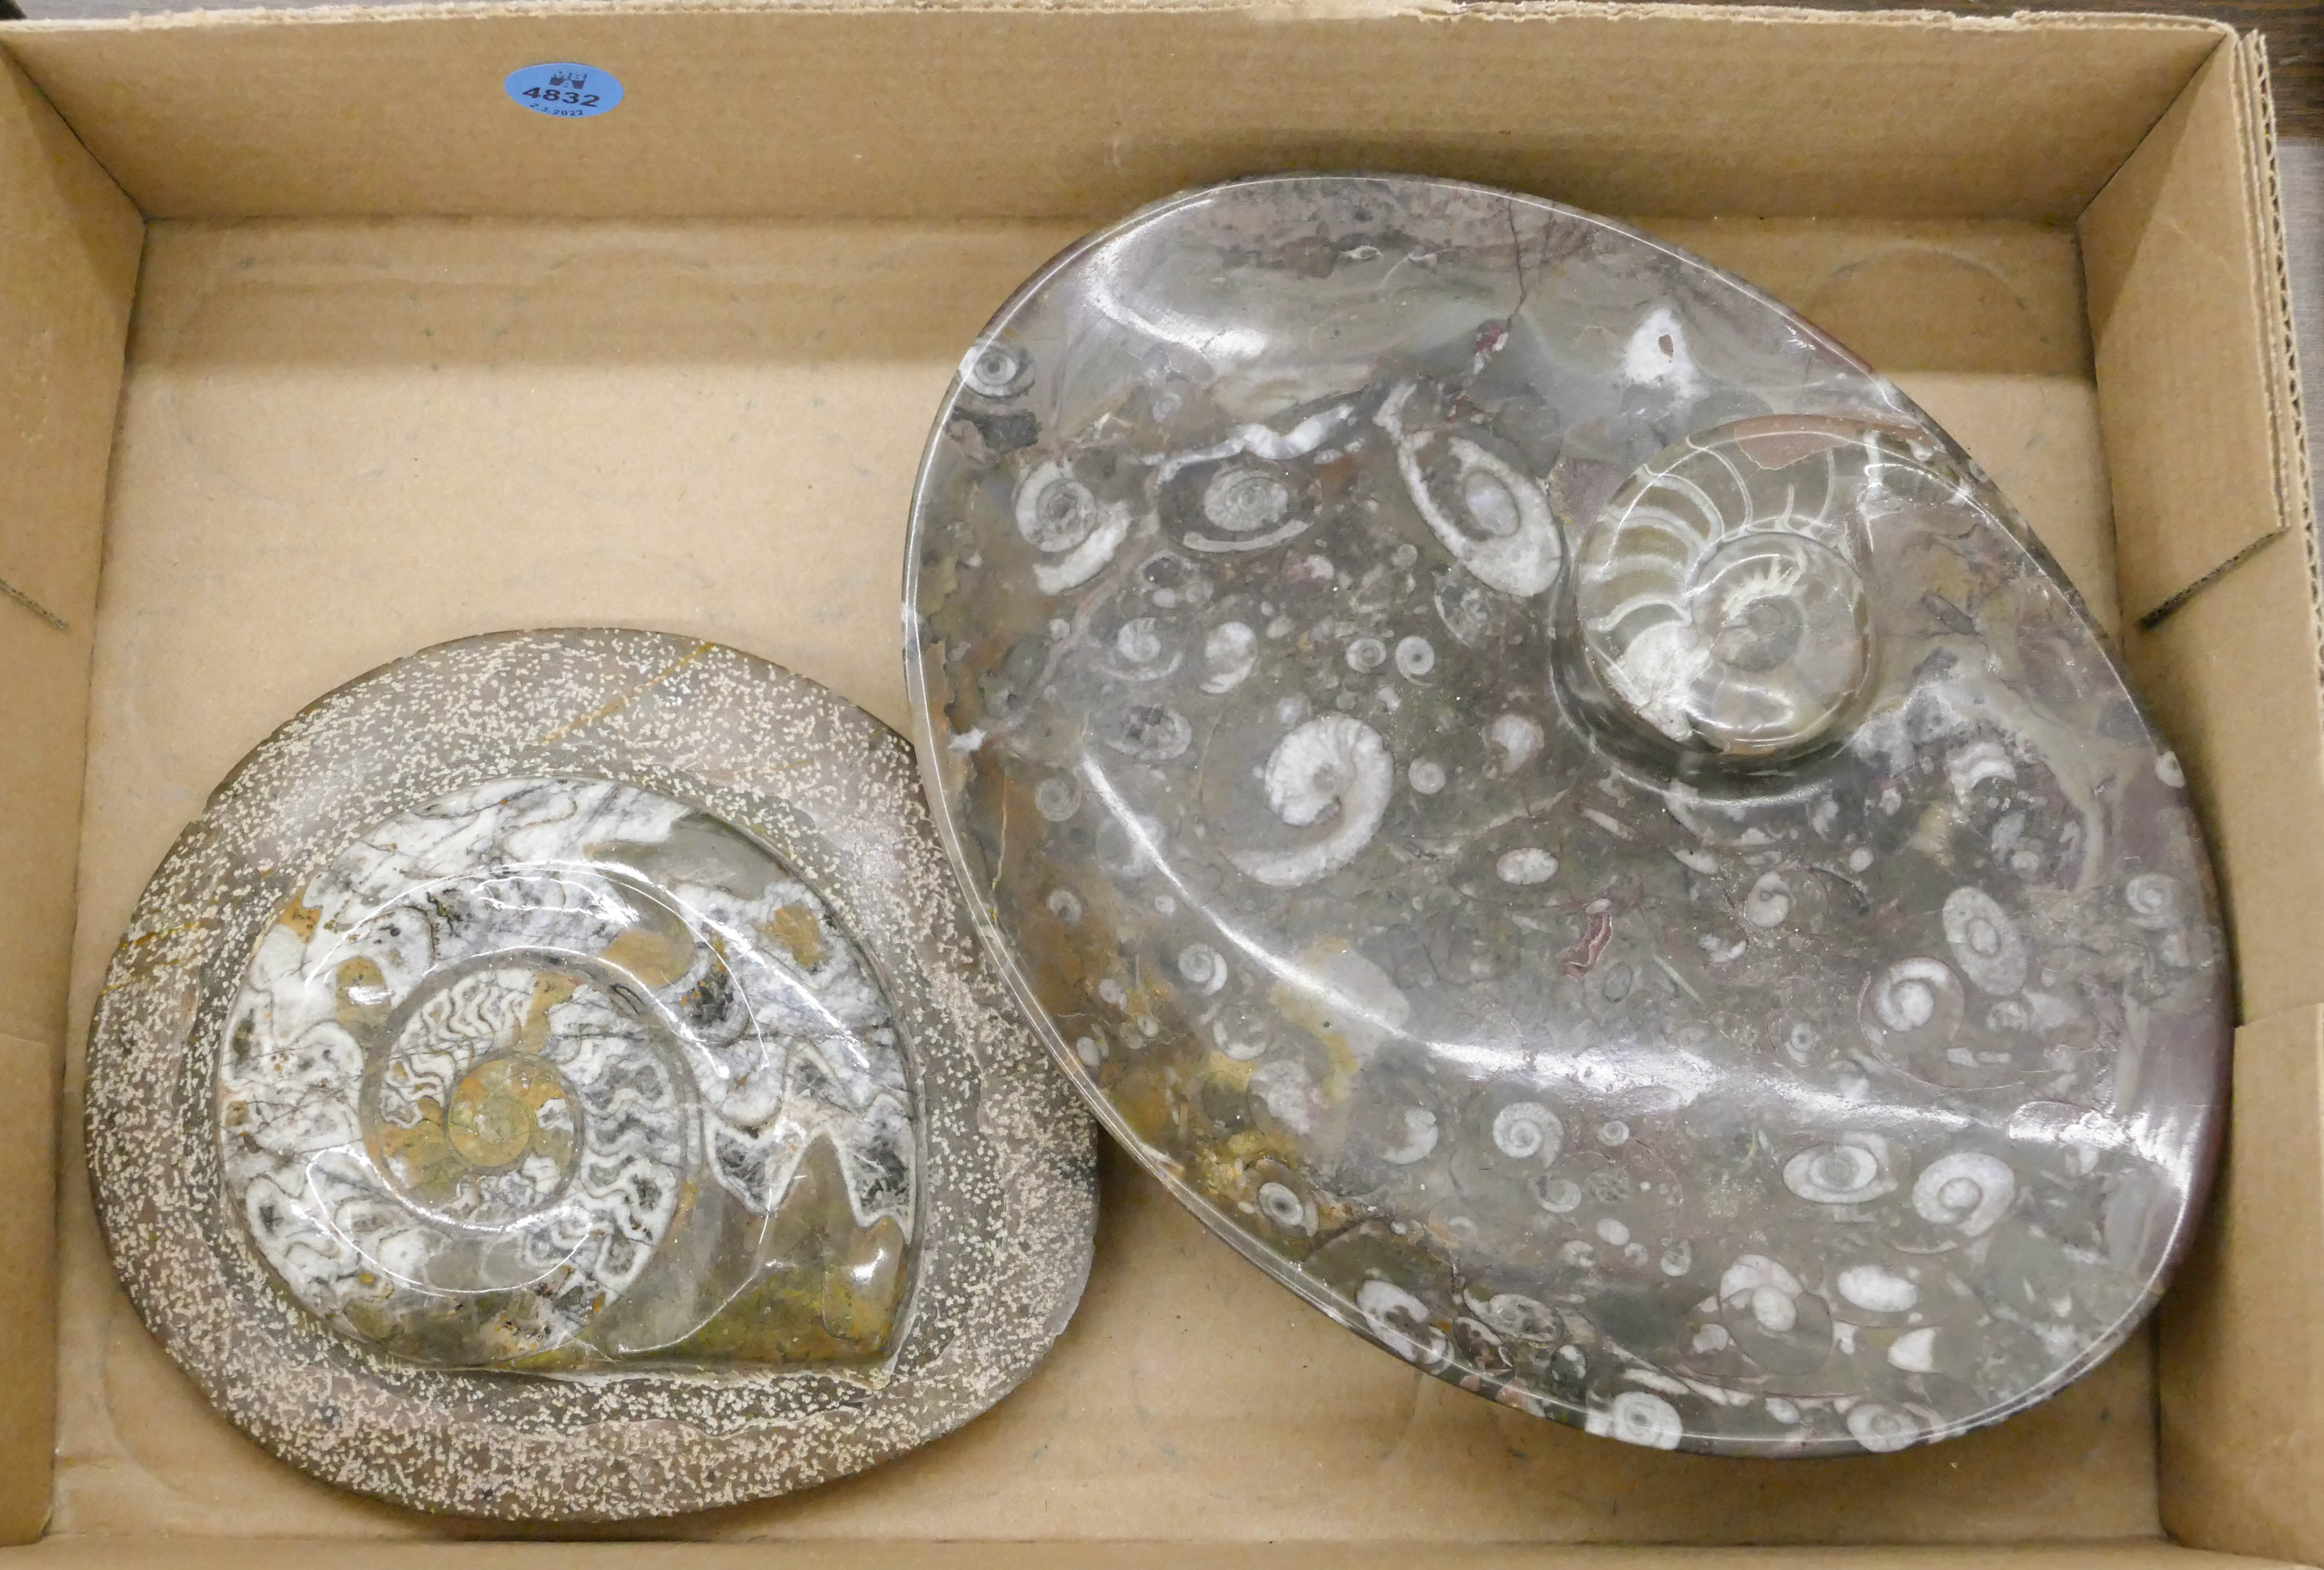 Box Polished Shell Fossils 36908d